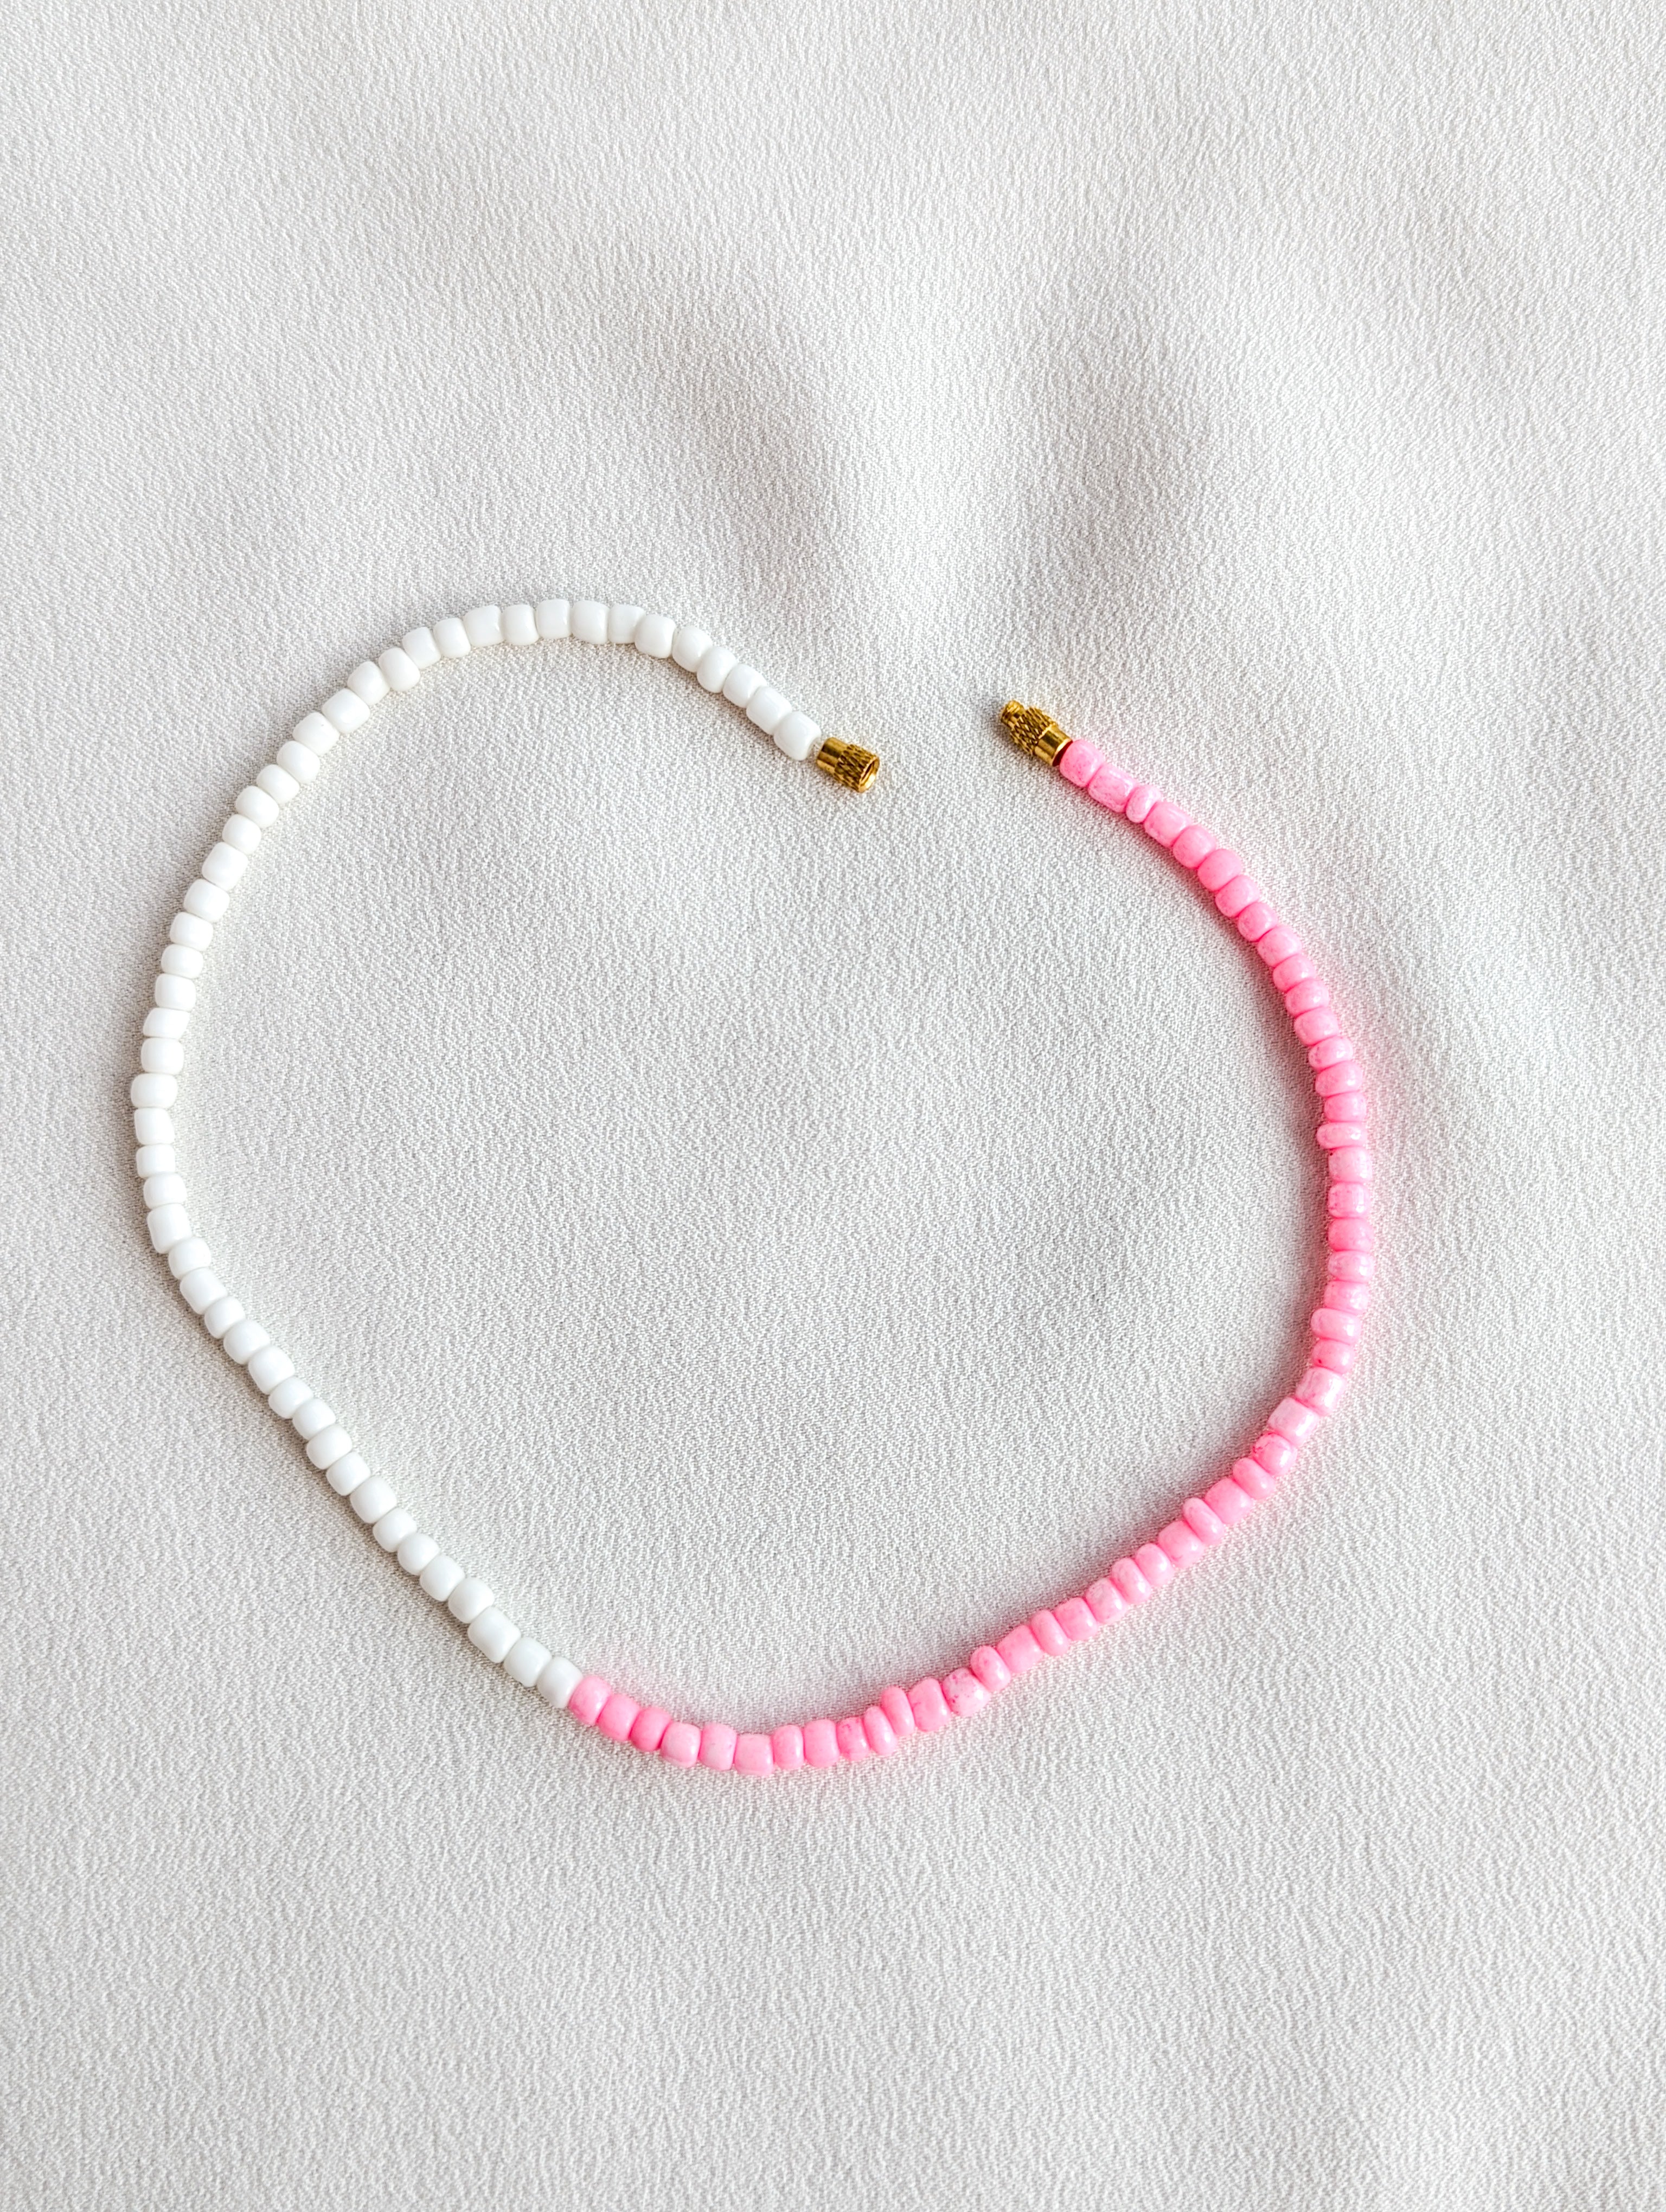 [THE FIFTY] Necklace: Pink/White [Large Beads]